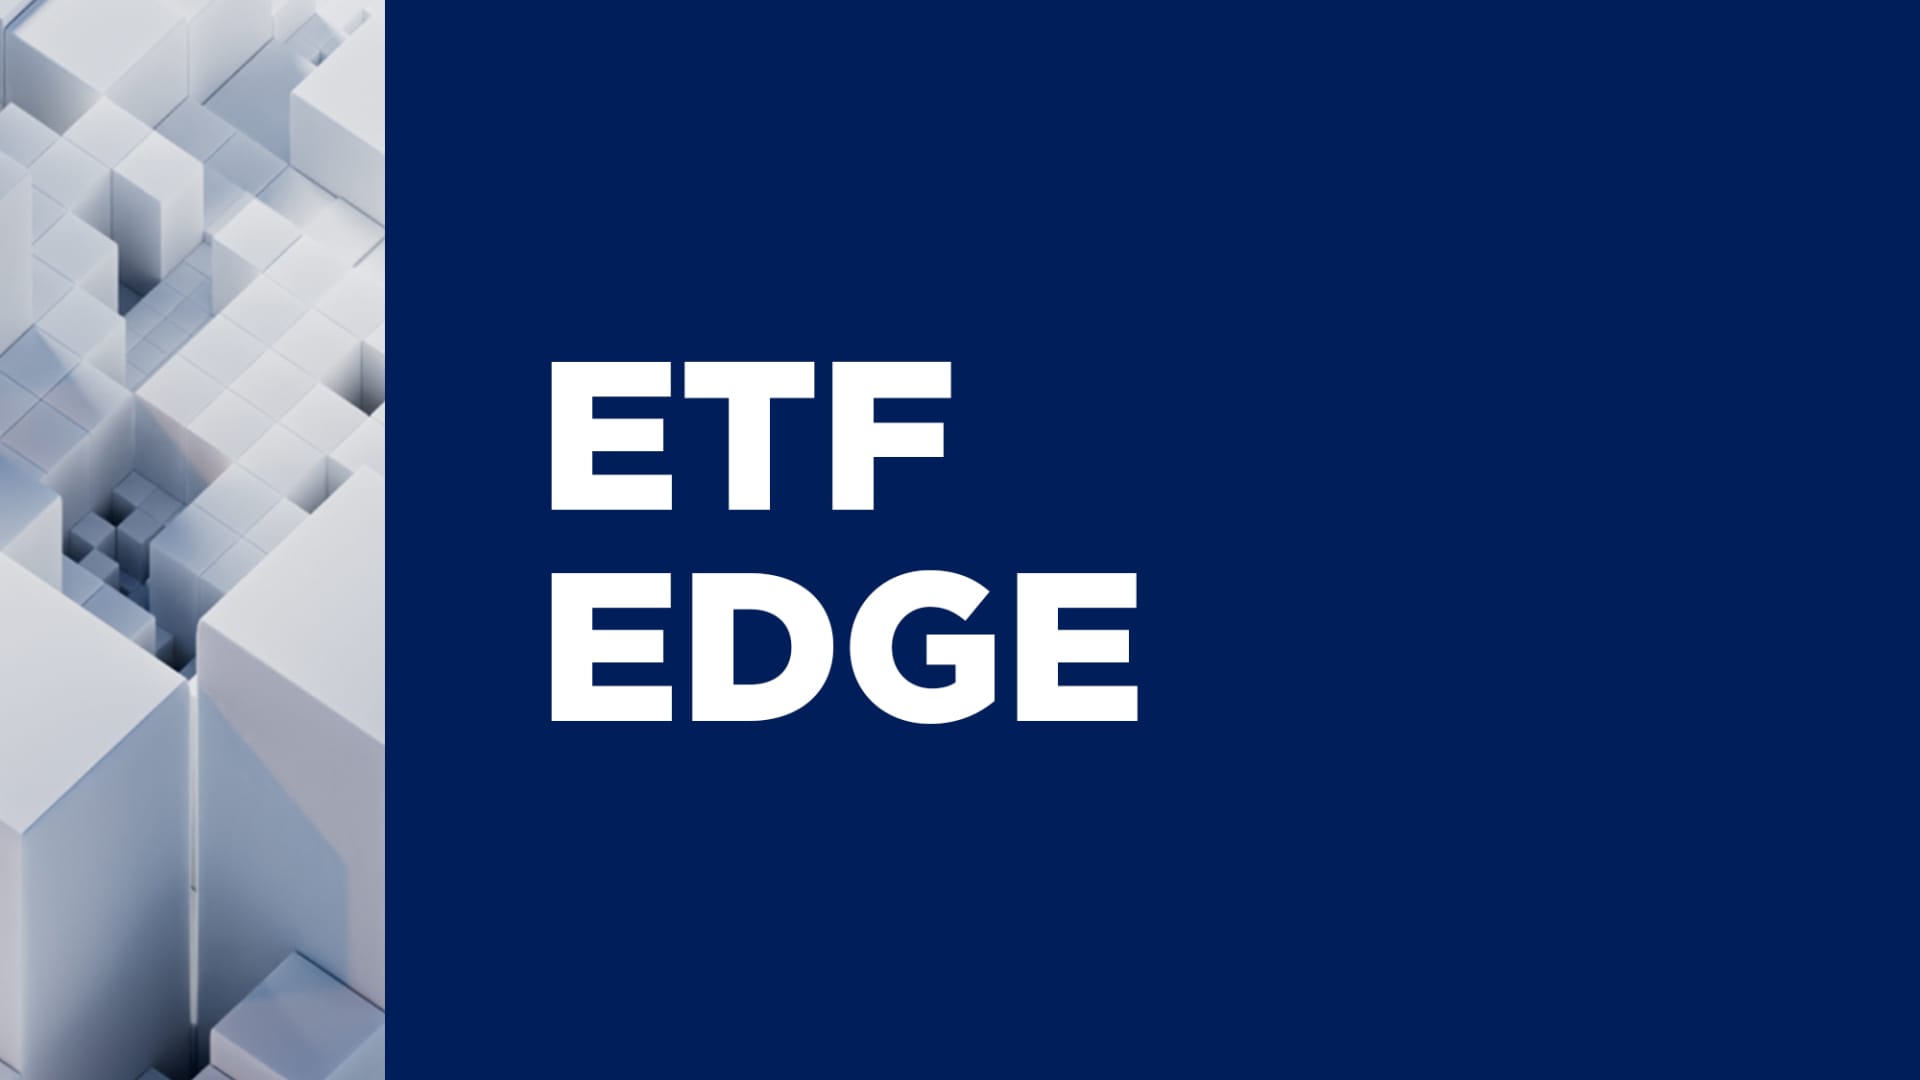 ETF Edge on how Middle East concerns, inflation & reflation has commodities on the move [Video]